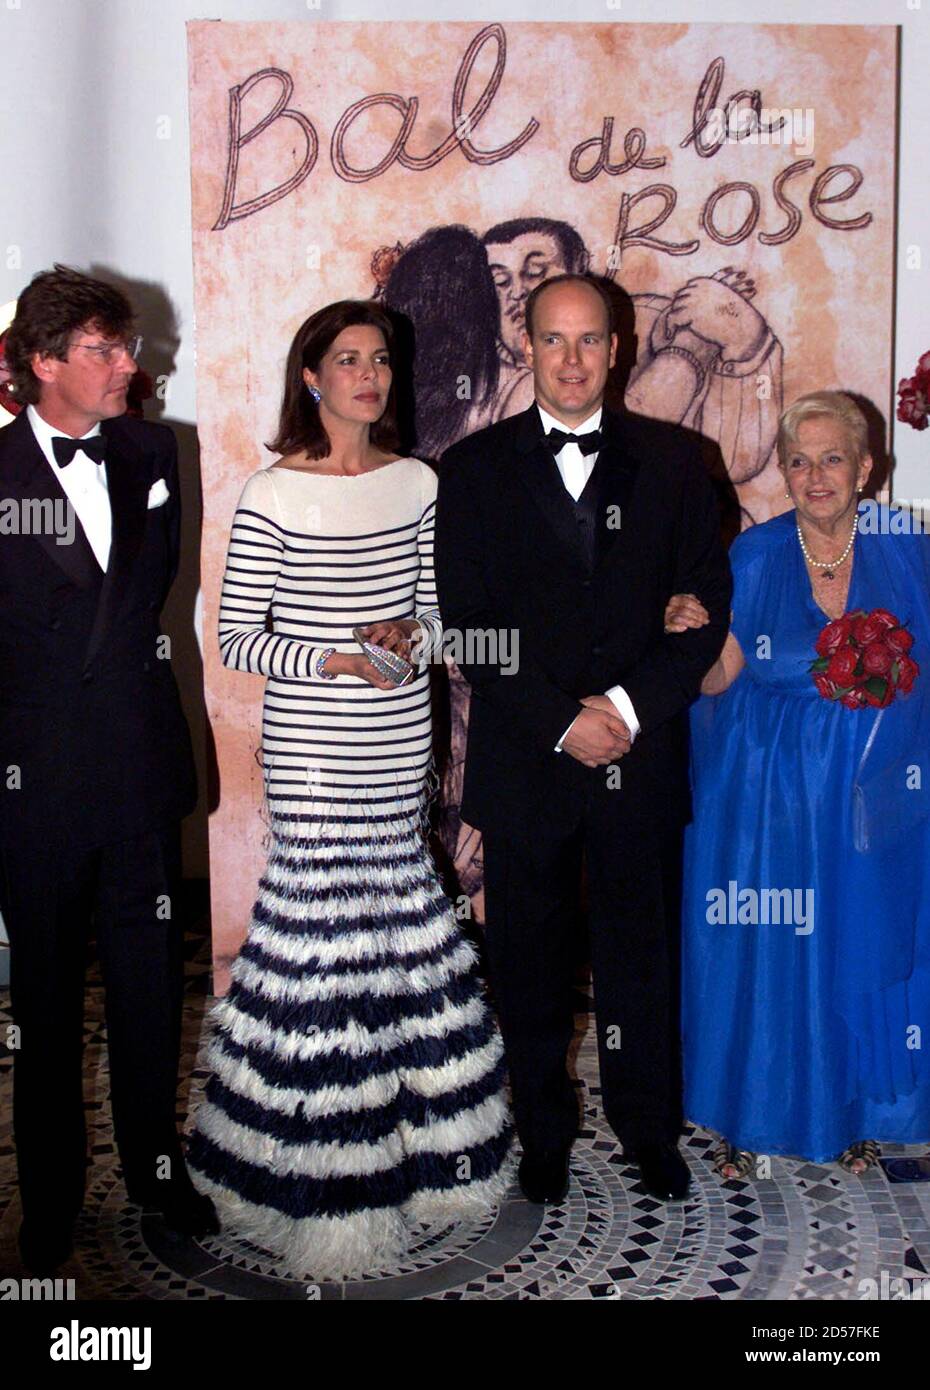 Monaco royal family members (L-R) Prince Ernst of Hanover, Princess Caroline, Prince Albert and Princess Antoinette arrive at the Monte Carlo sporting club to attend the 'Bal de la Rose', a yearly charity event for the Princess Grace foundation March 25.  EG/ Stock Photo